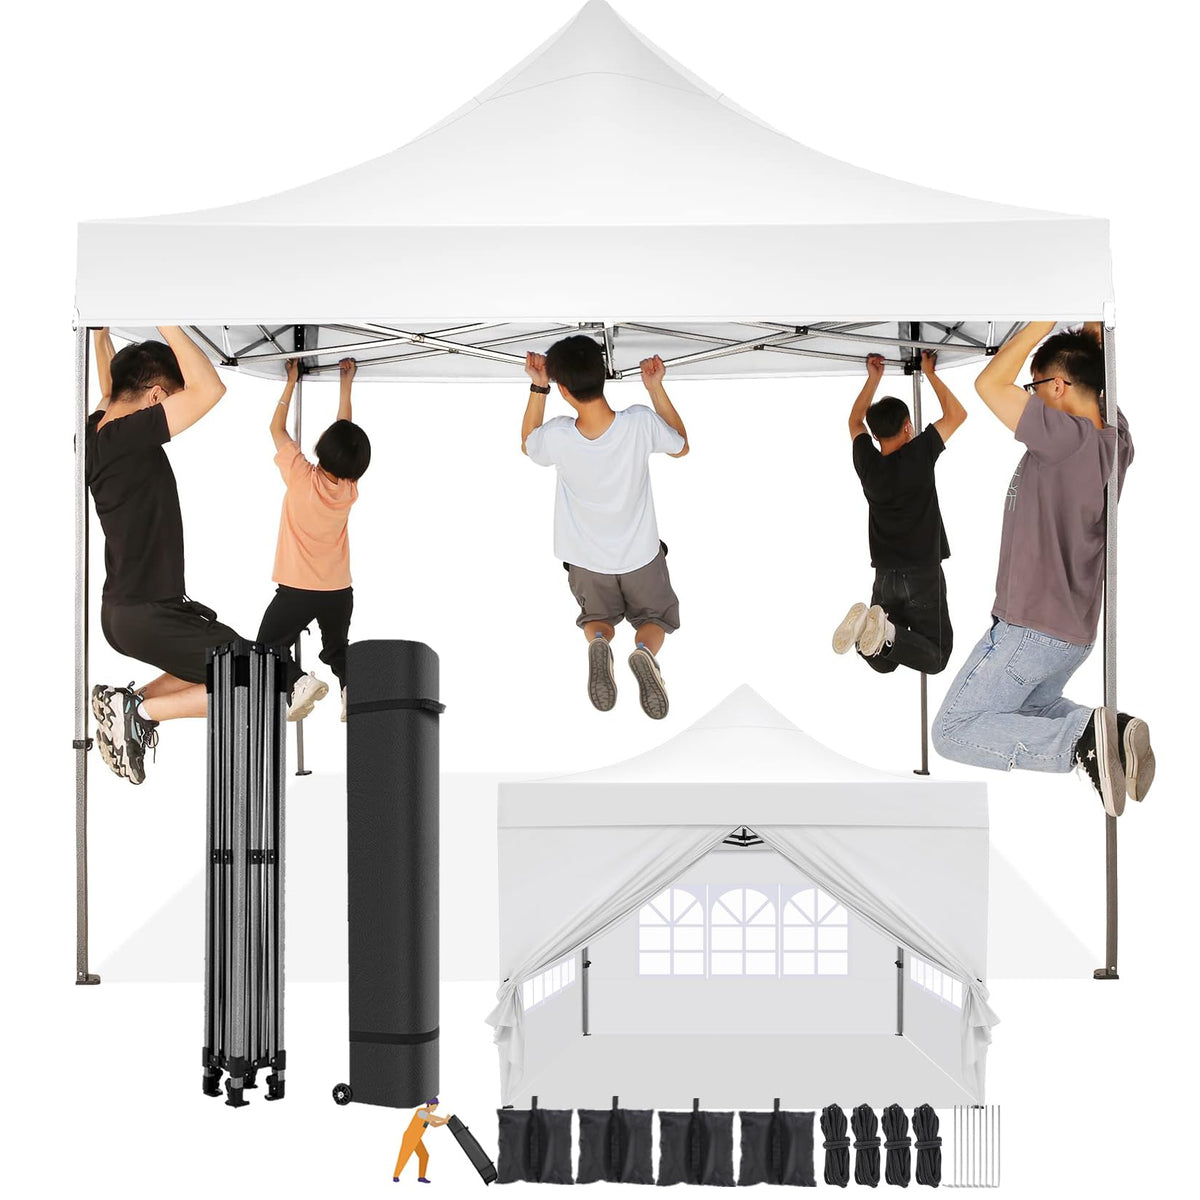 HOTEEL 10x10 Pop Up Canopy with 4 Sidewall,Heavy Duty Canopy UPF 50+ All Season Wind Waterproof Commercial Outdoor Wedding Party Tents for Parties Canopy Gazebo with Roller Bag(10 x 10 ft White)